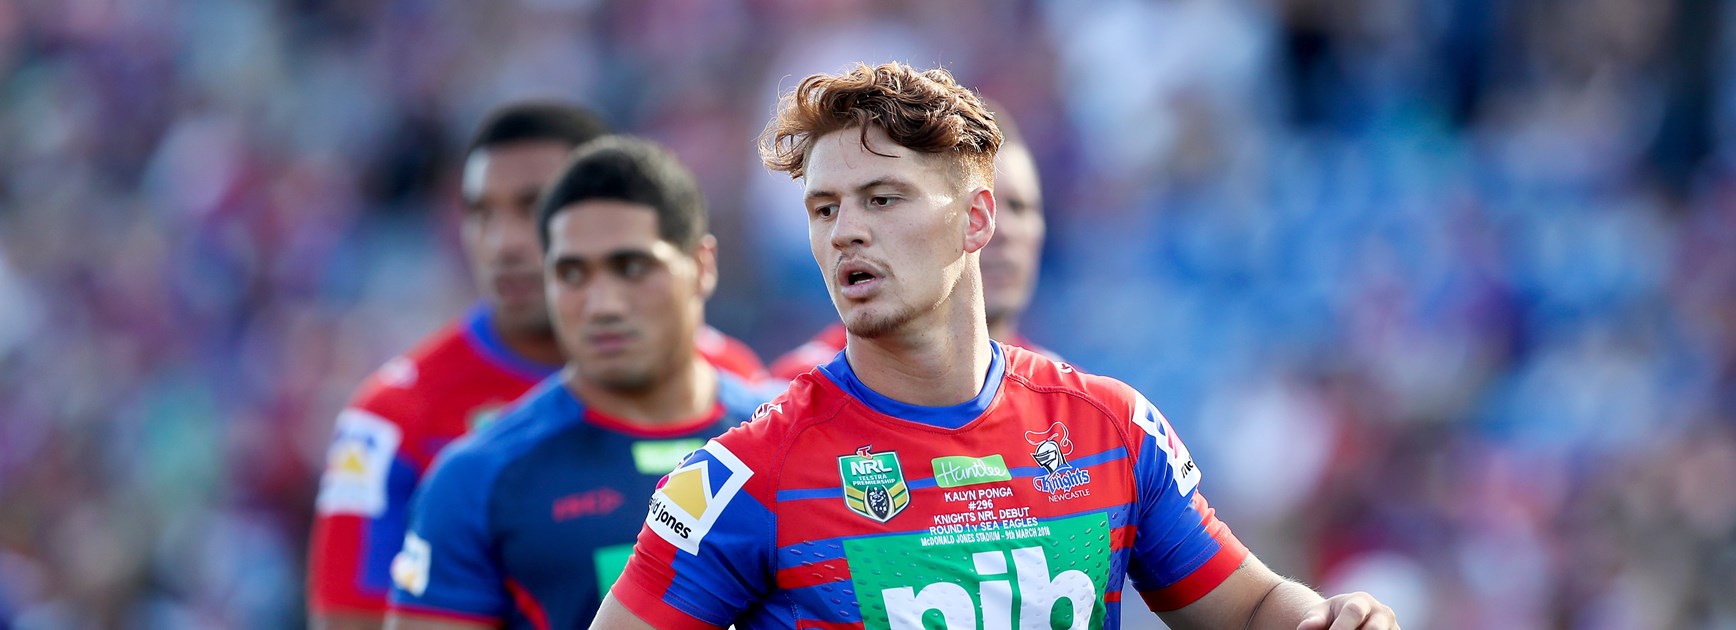 Knights halves Pearce and Ponga share the love